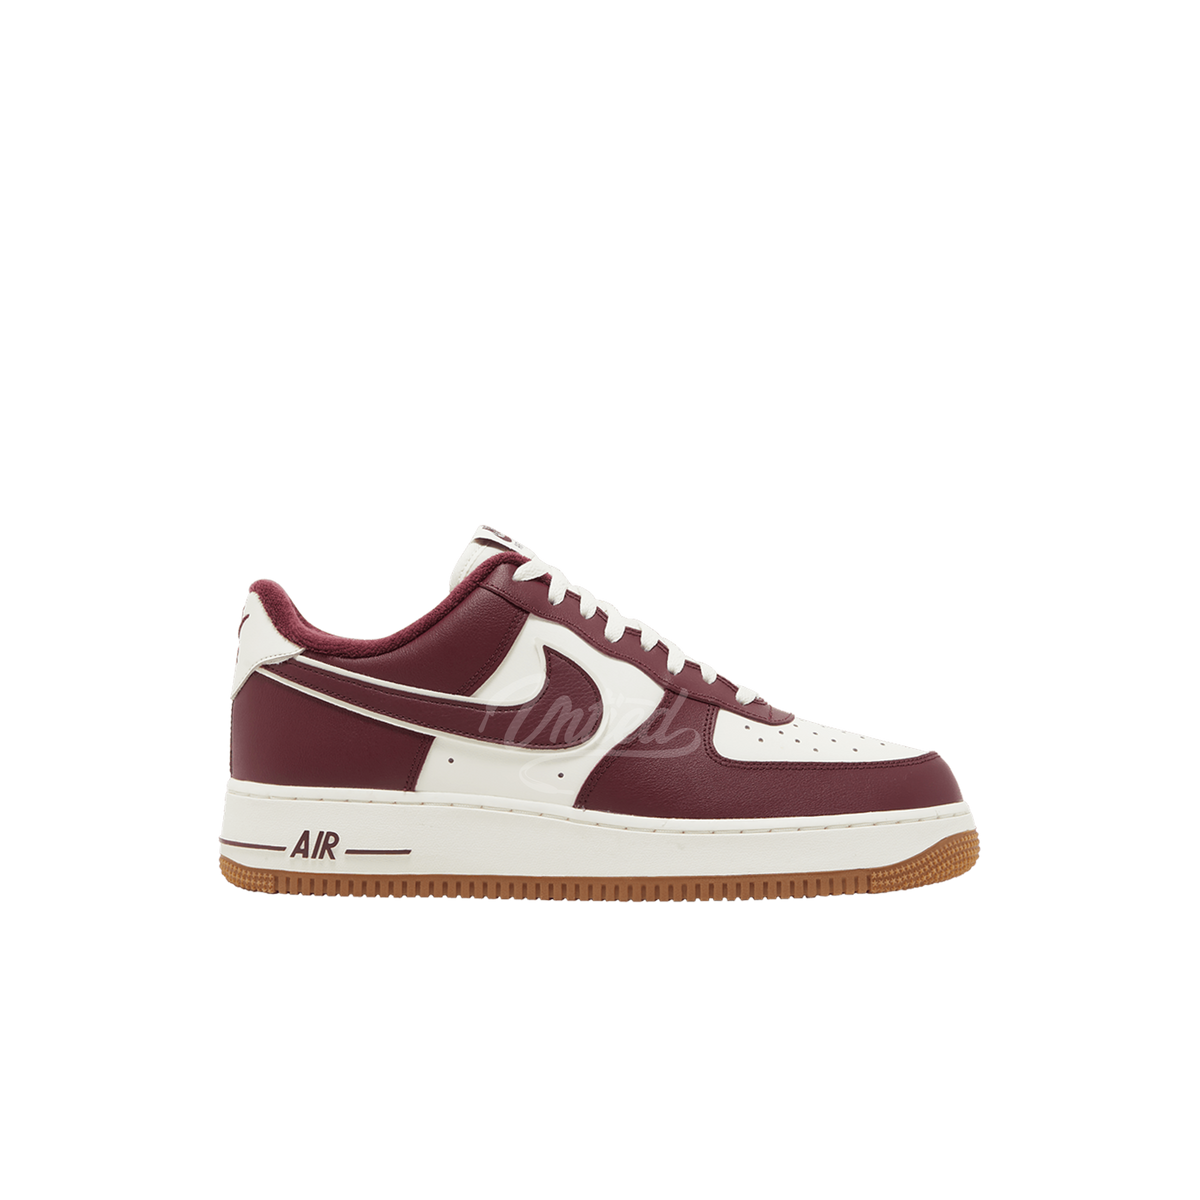 Air Force 1 "College Pack Maroon"